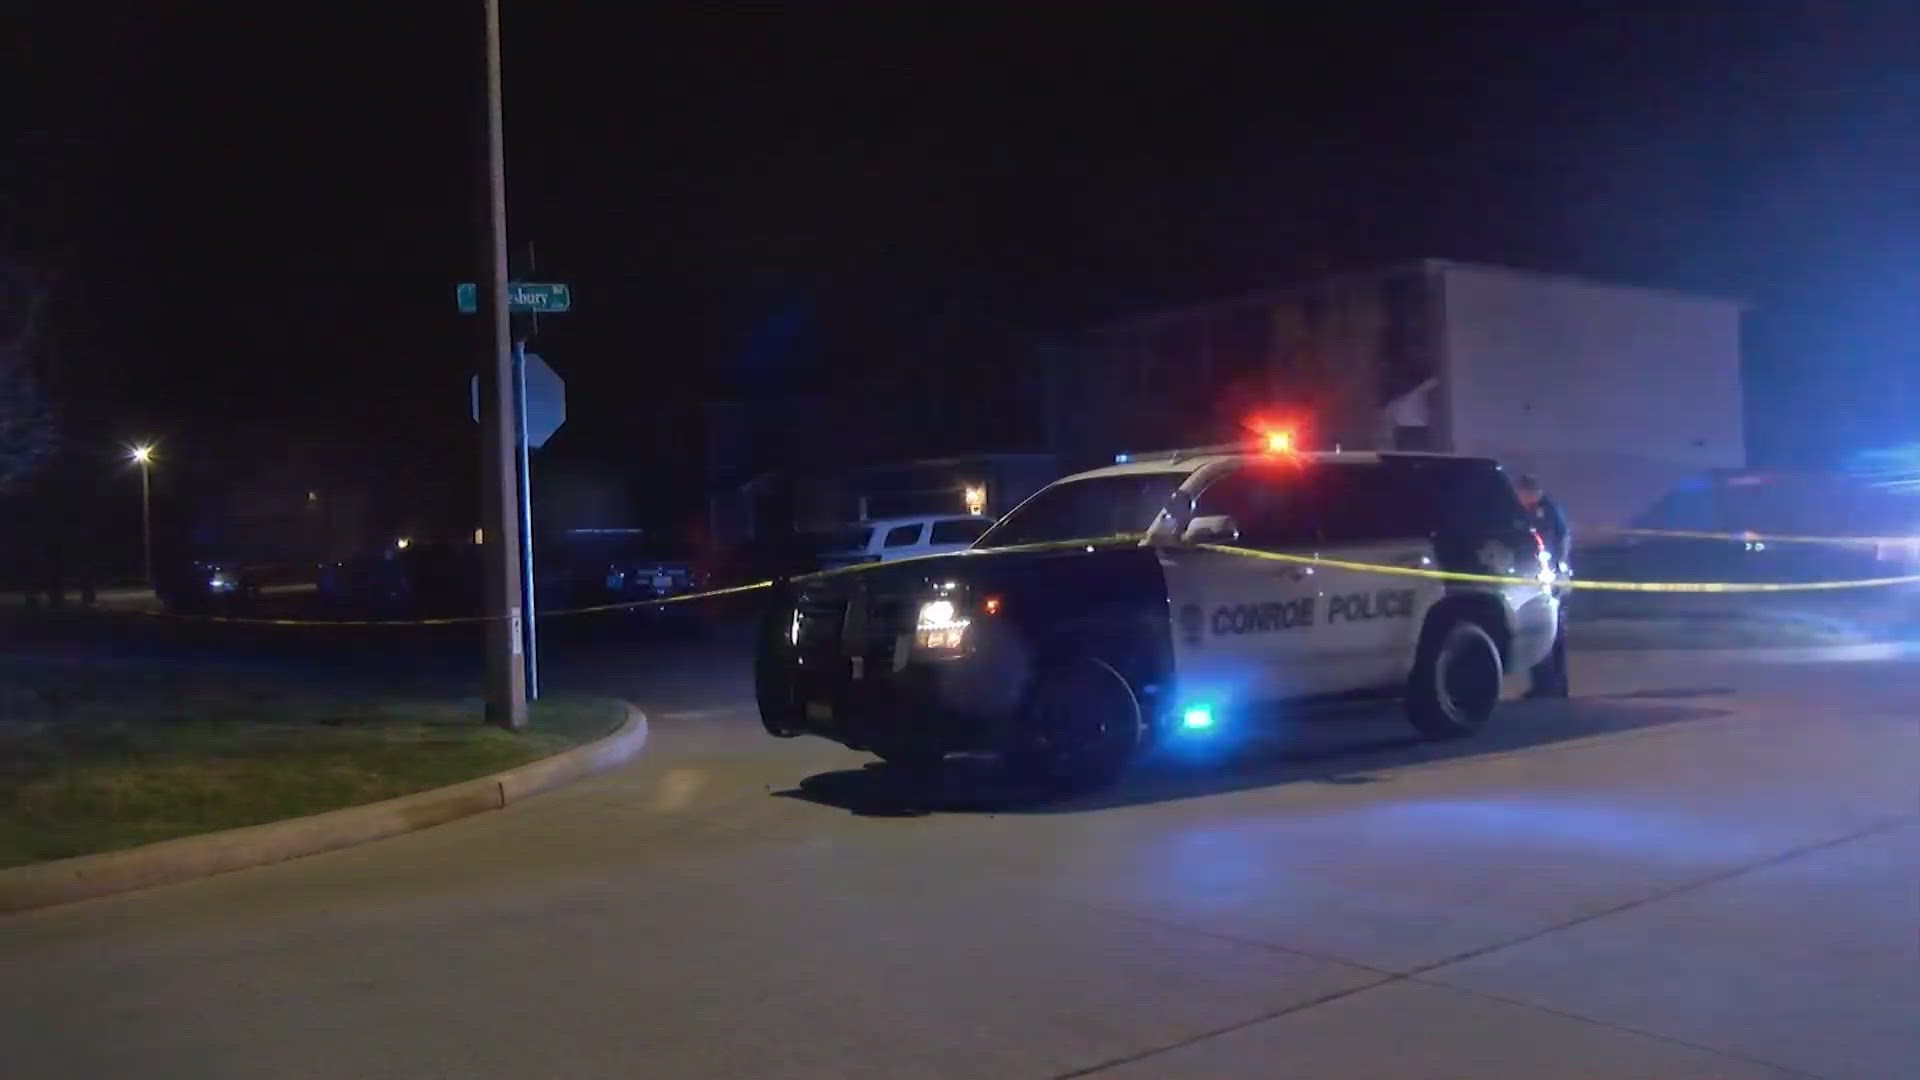 An investigation is underway after Conroe police shot and killed an assault suspect late Monday night.